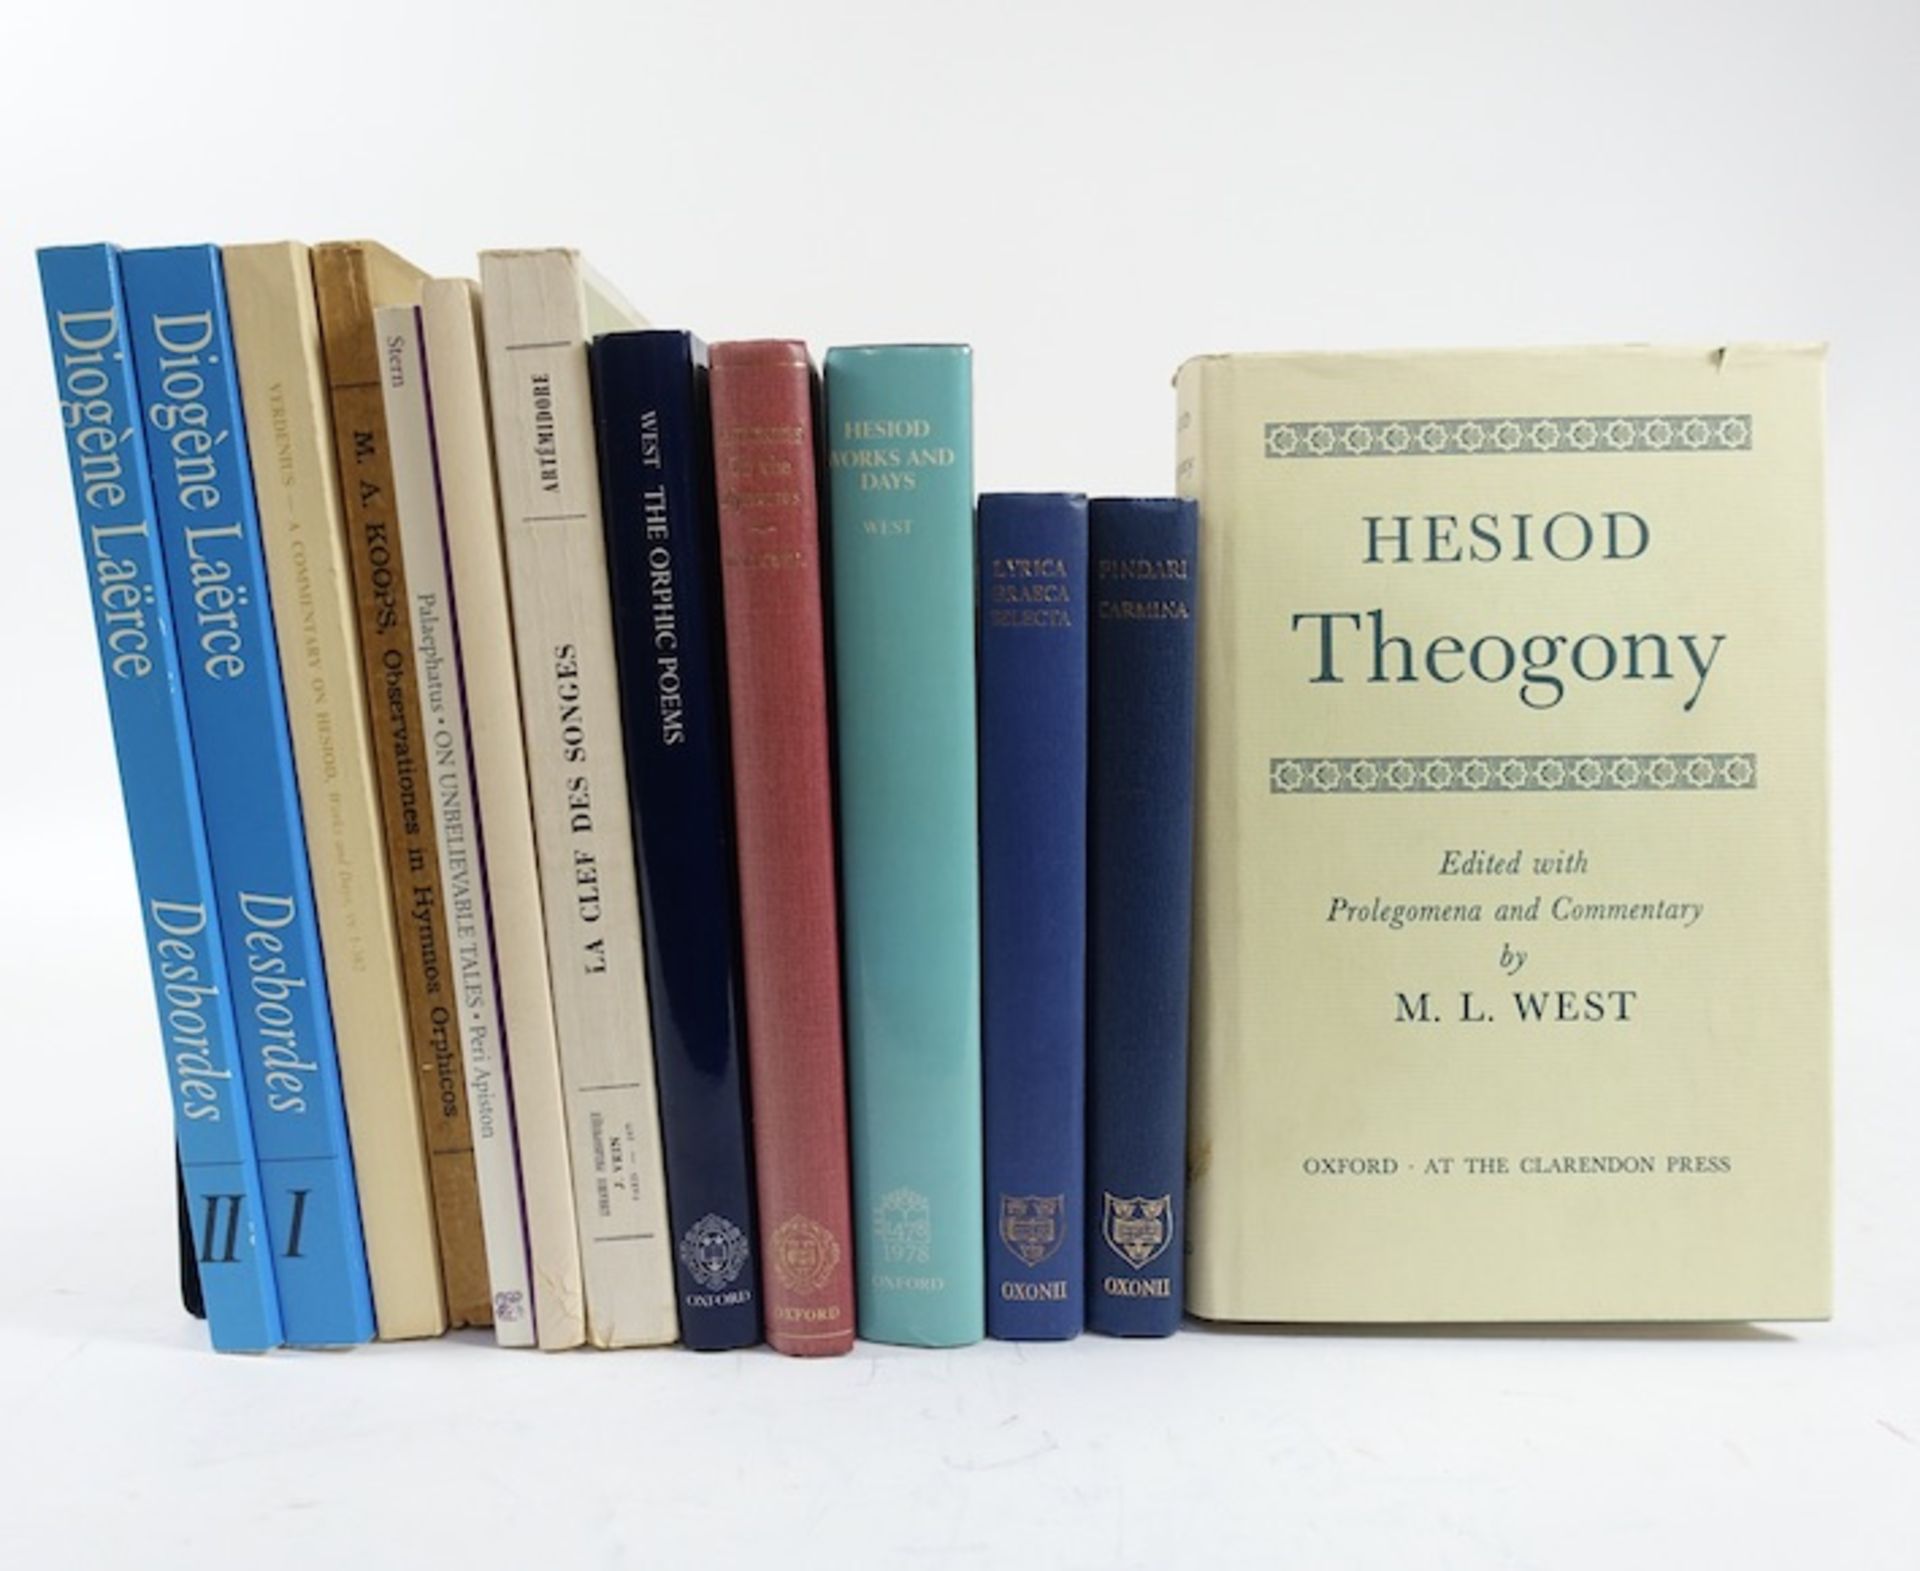 HESIODUS. Works and days - Theogony. - Ed. w. proleg. & comm. by M.L. West. (1978-82). 2 vols. Or.